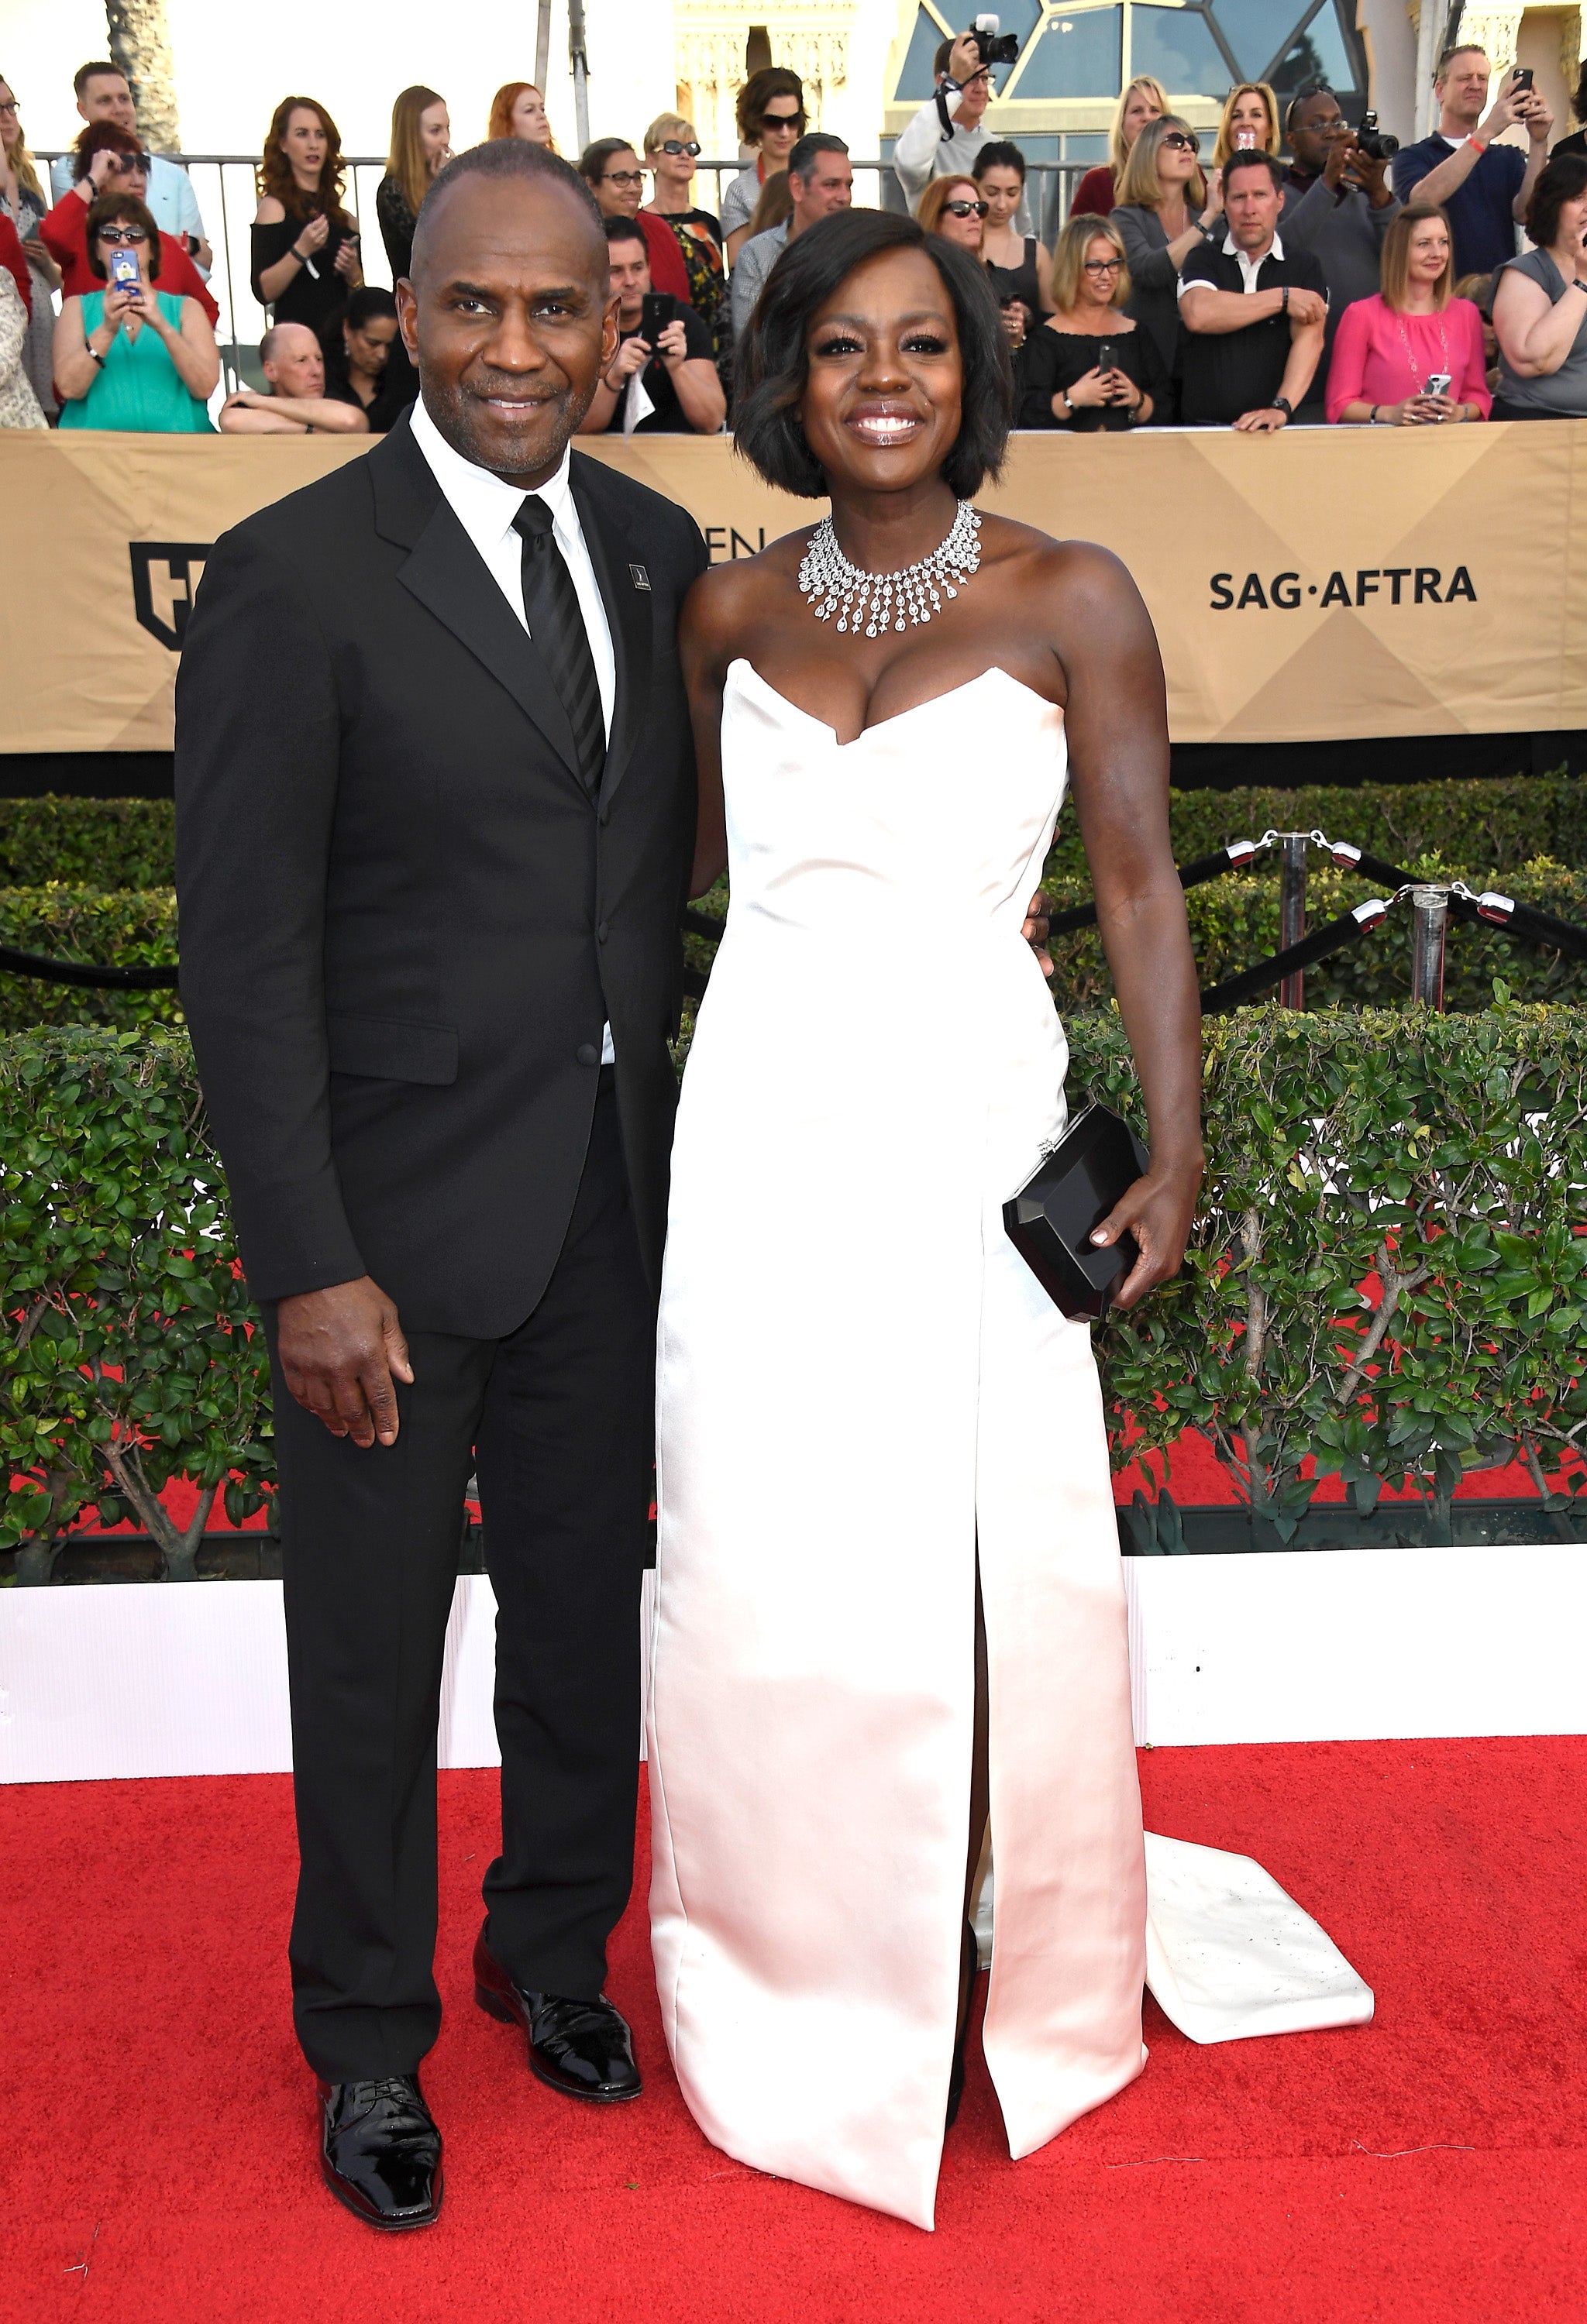 You Have to See These Jaw-Dropping Looks From the 2017 SAG Awards Red Carpet
